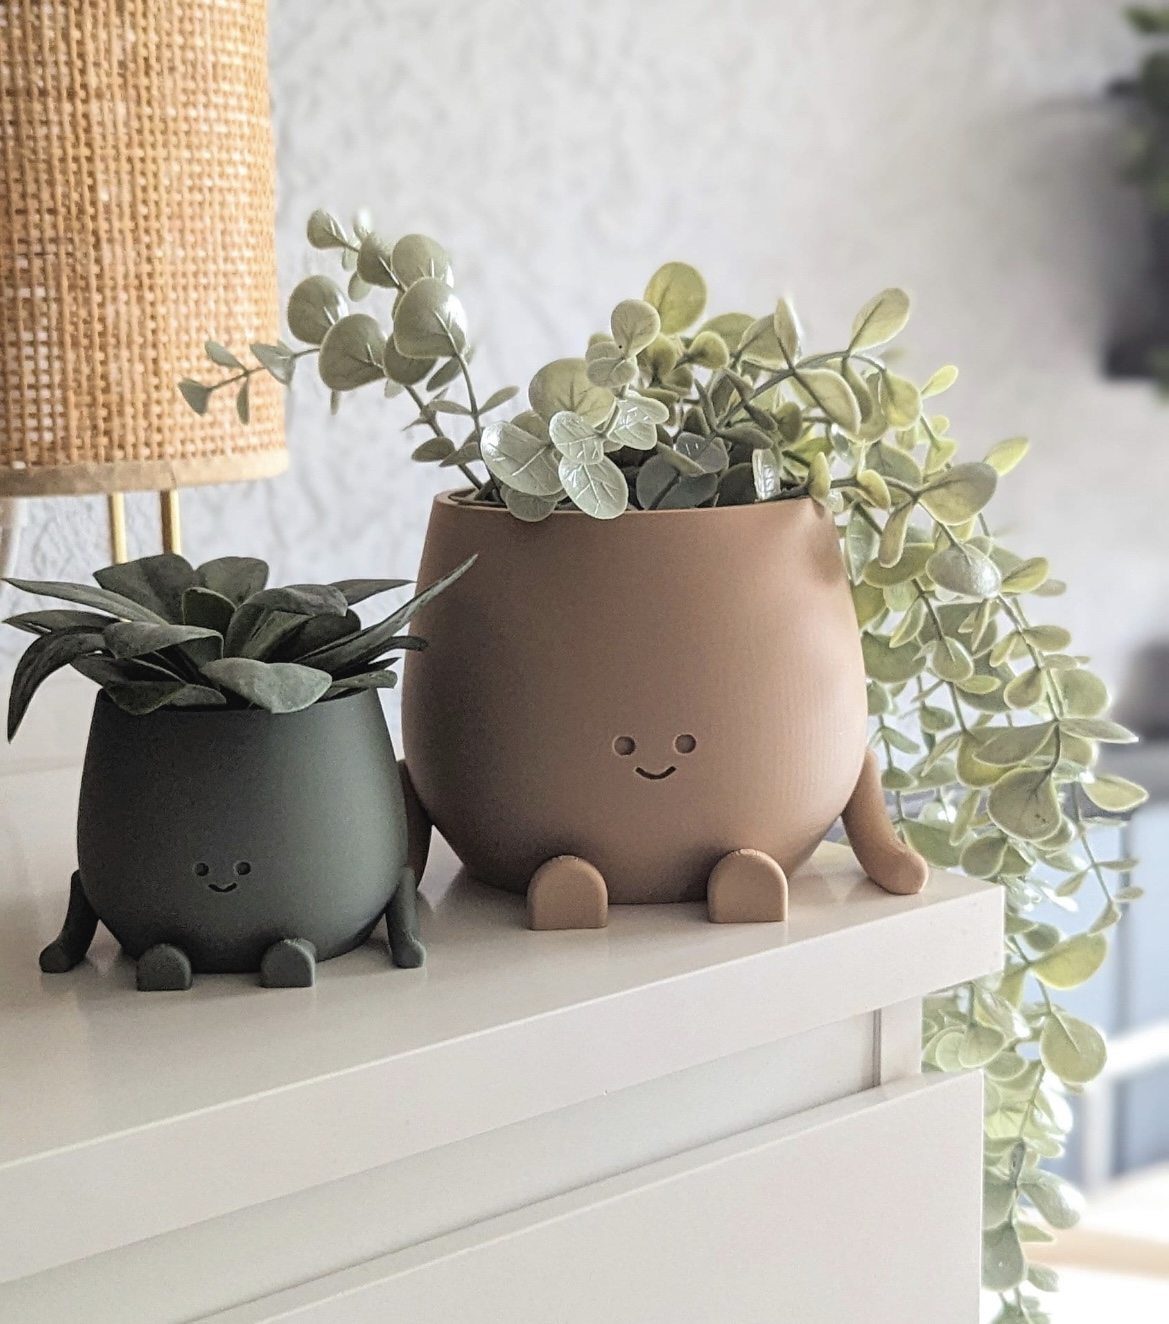 standing and sitting Cute faces plant pots on etsy. Best friend gifts. Gift ideas for best friend. BFF gift ideas. Bestie gift ideas. Gift Ideas for a special friend. Gift ideas for sister. Gift ideas for female best friends. Presents for best friend. Unique best friend gifts. Meaningful gift ideas. Thoughtful presents